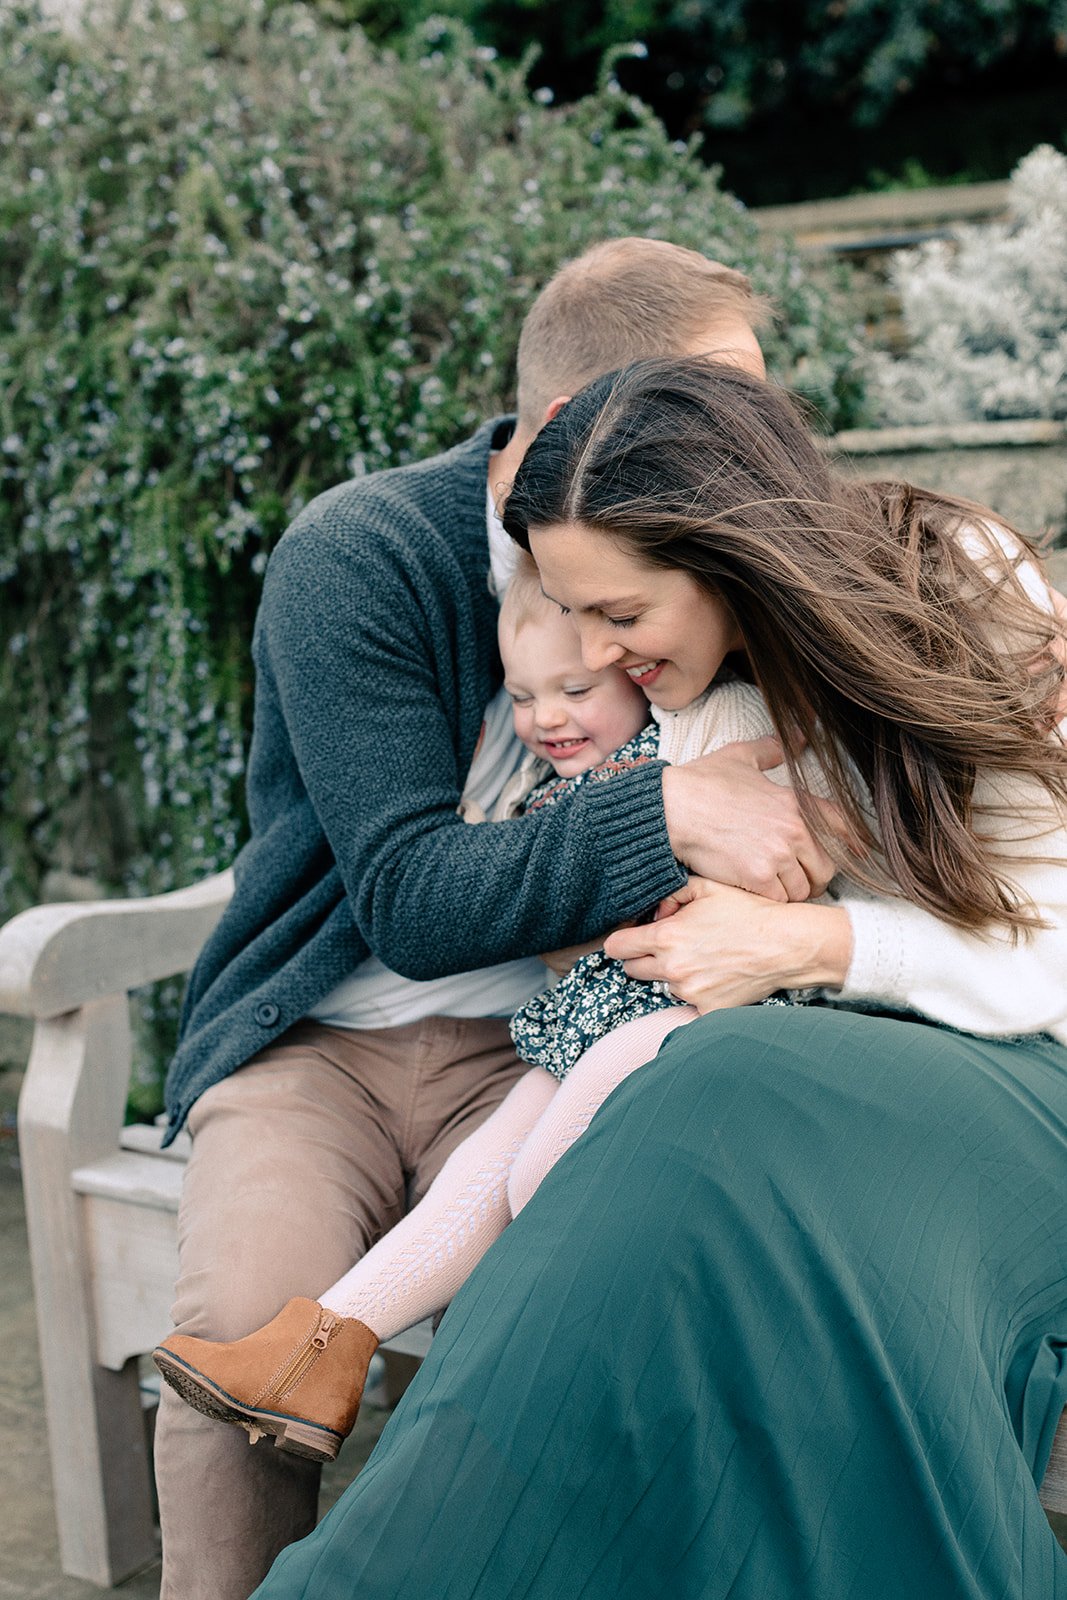  Family photographer captures family embracing in richmond park London 